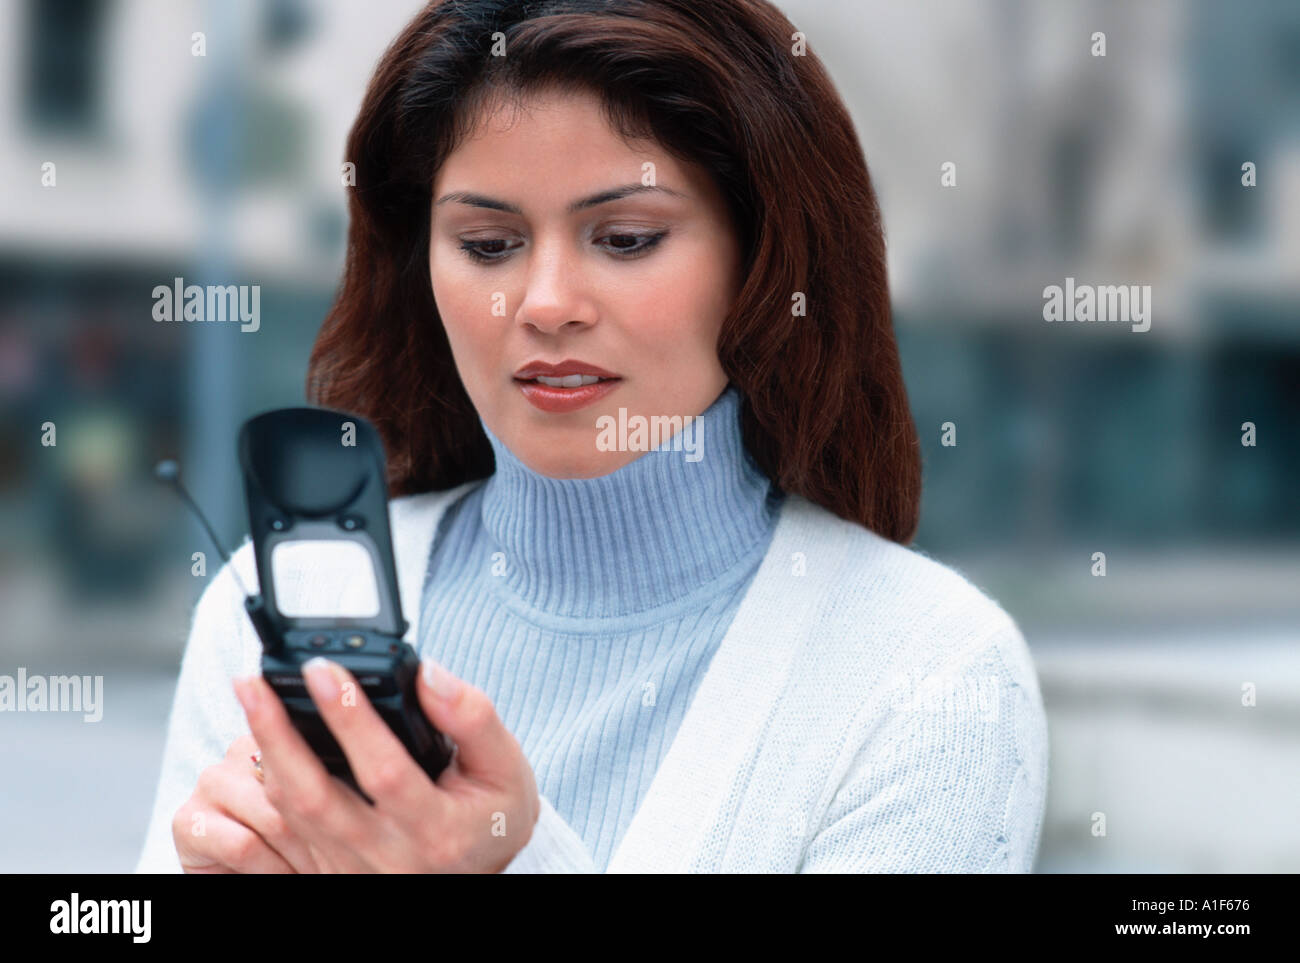 Woman dialing cell phone in street Stock Photo